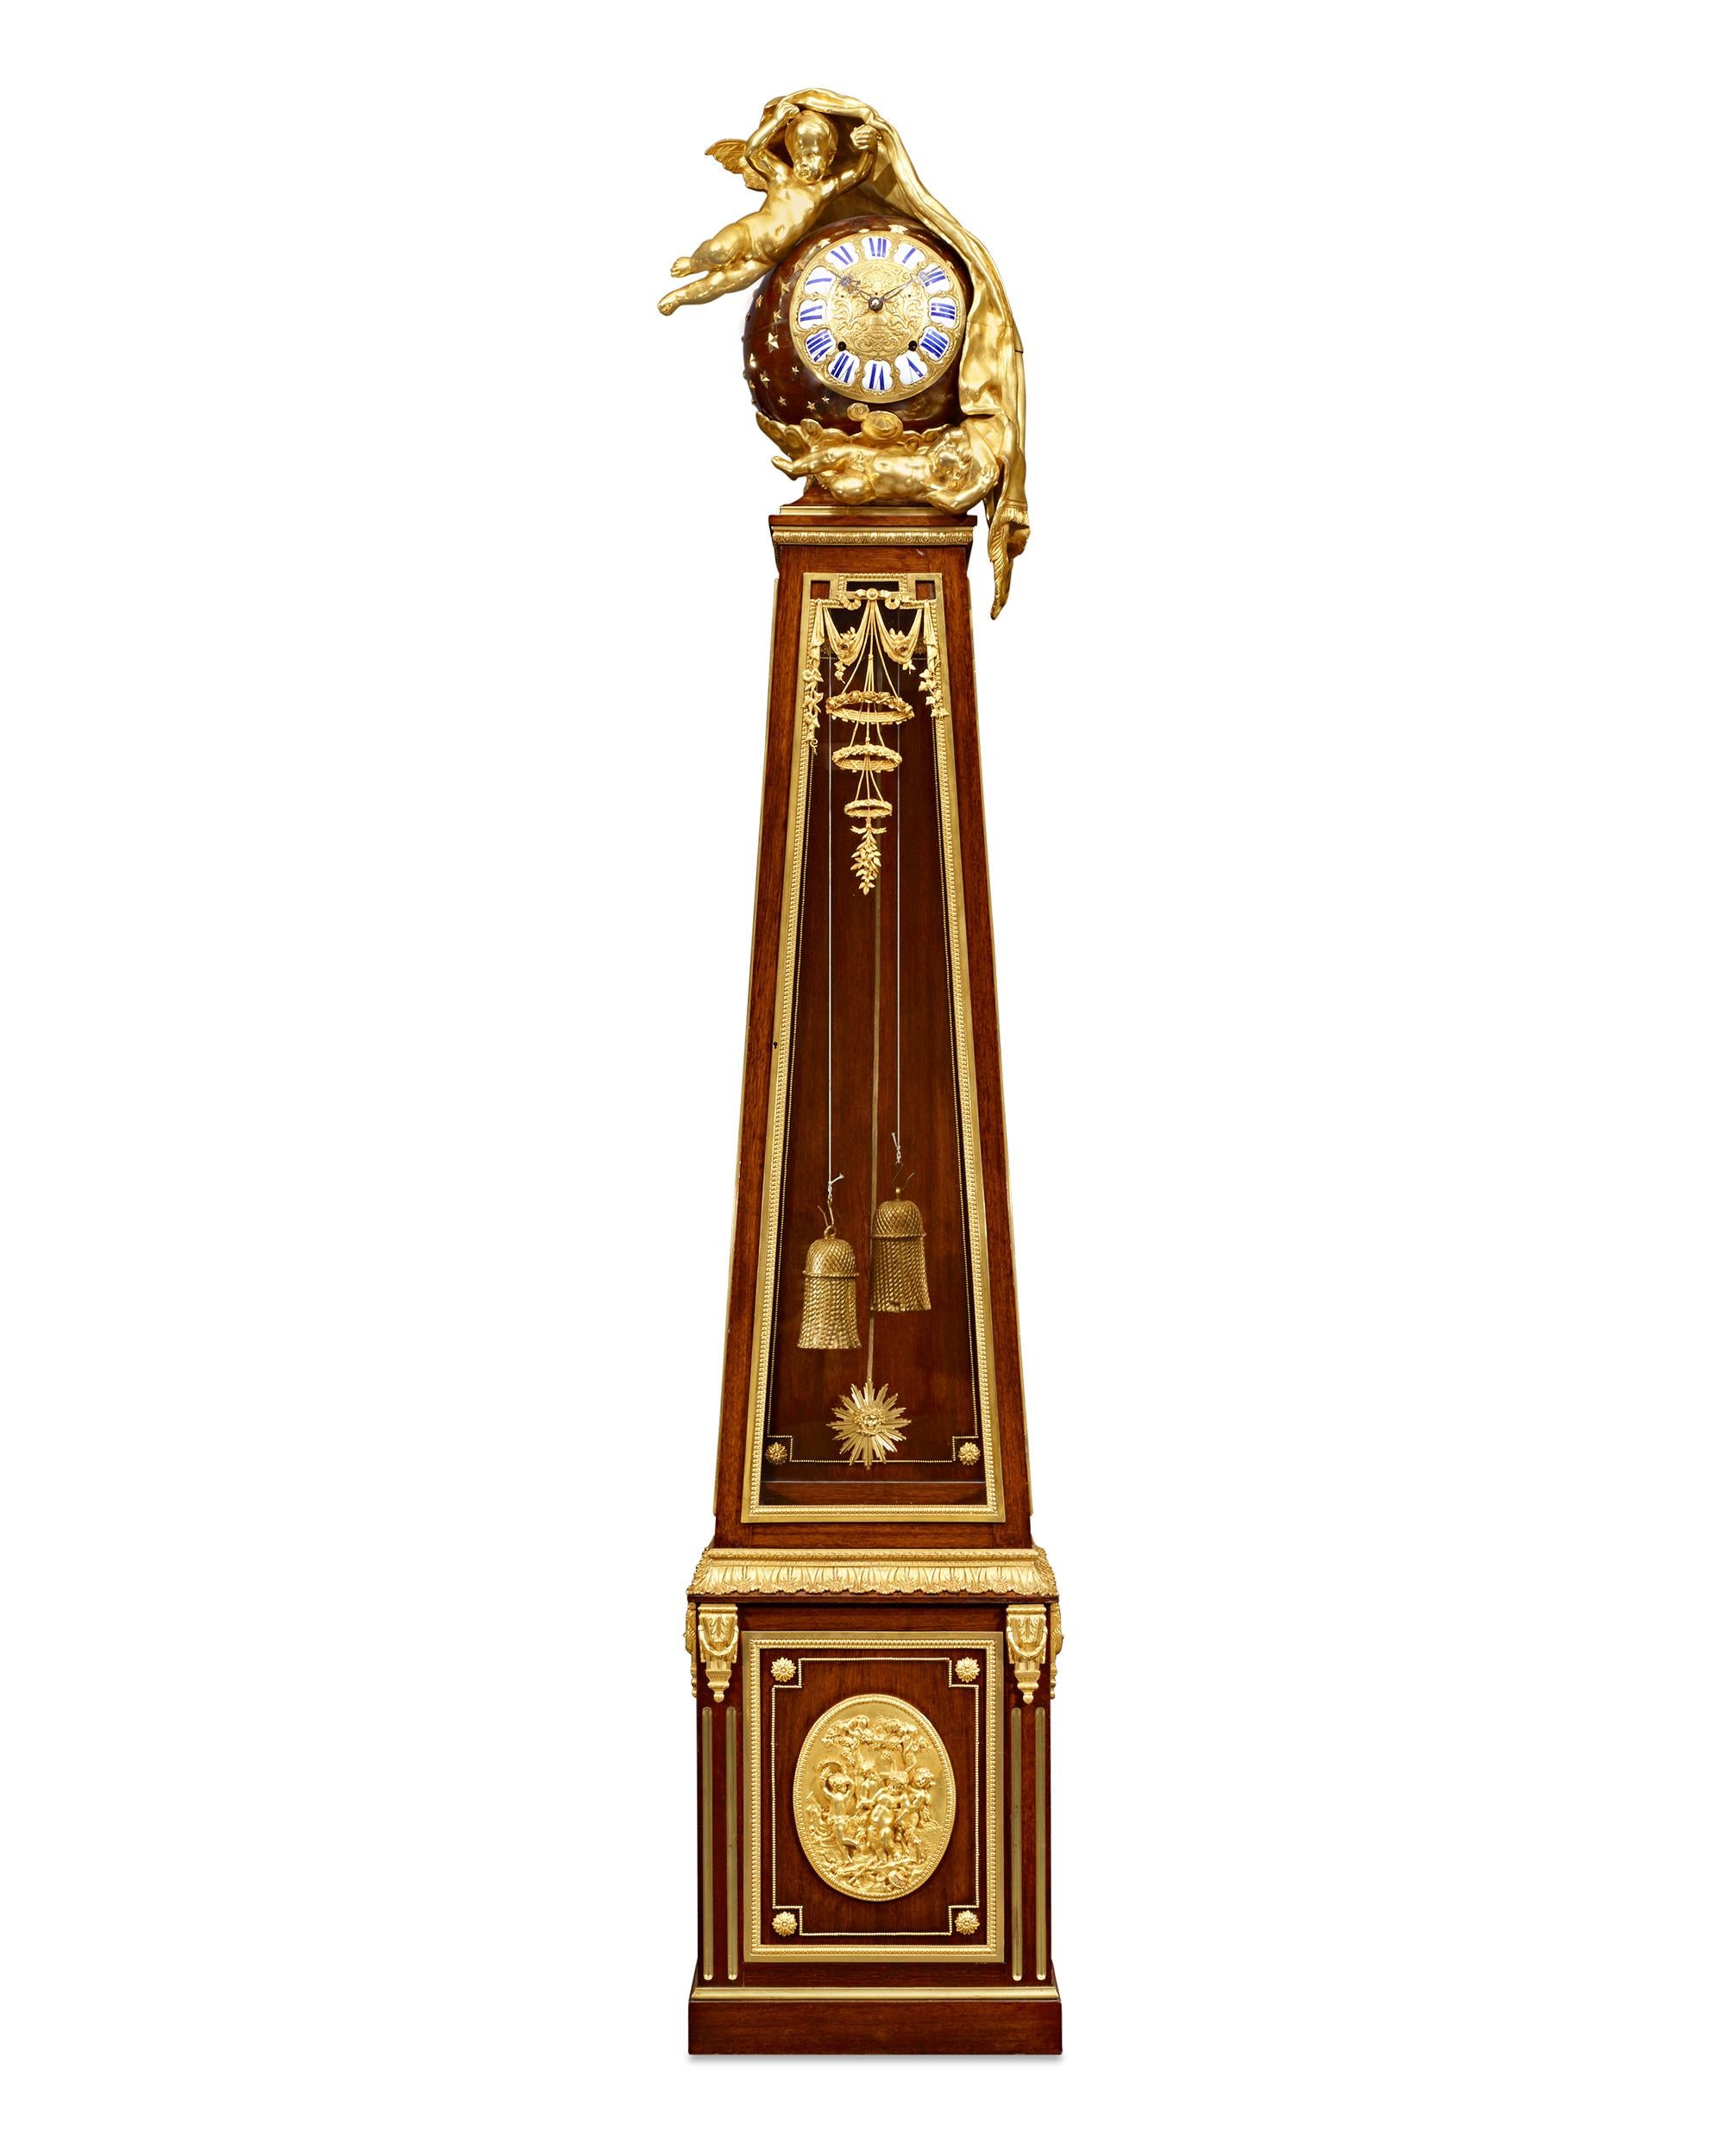 This monumental longcase regulator clock crafted in the resplendent Louis XVI style is both a marvel of horological innovation and a paragon of artistic finesse. This timepiece, reminiscent of Jean-Henri Riesener's famed régulateur de parquet in the